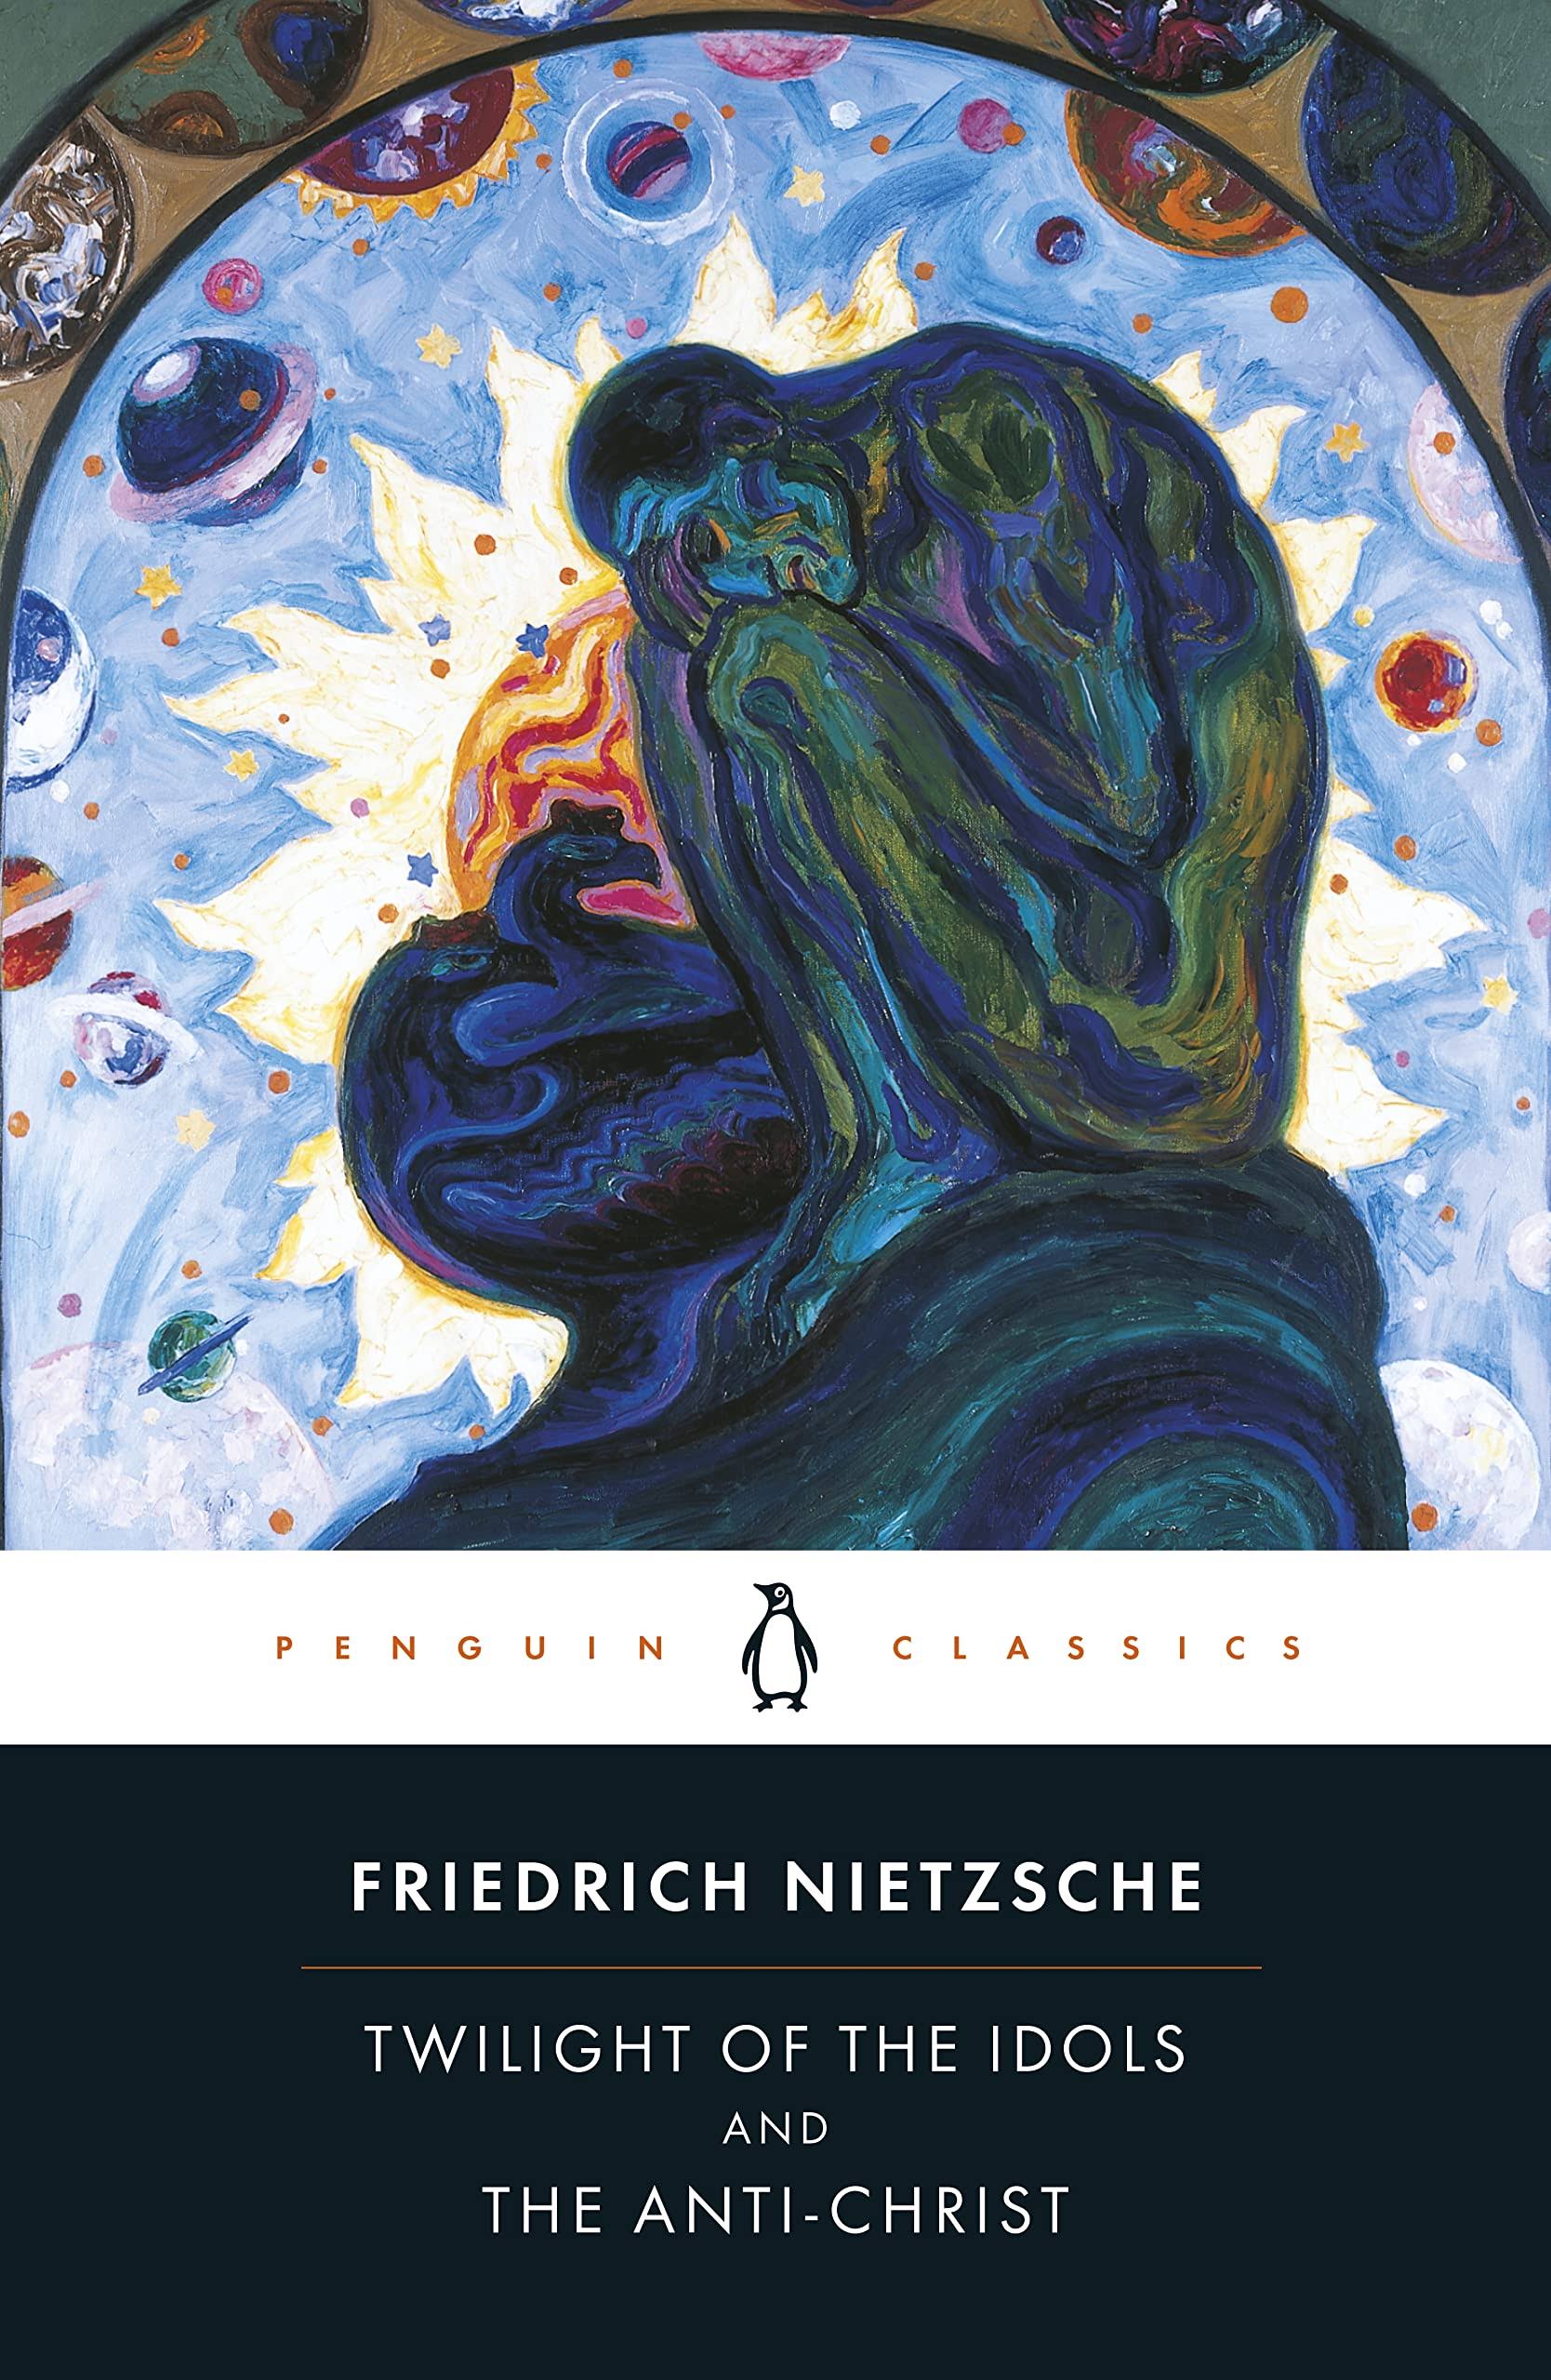 The Twilight of the Idols and the Anti-Christ: or How to Philosophize with a Hammer - Friedrich Nietzsche